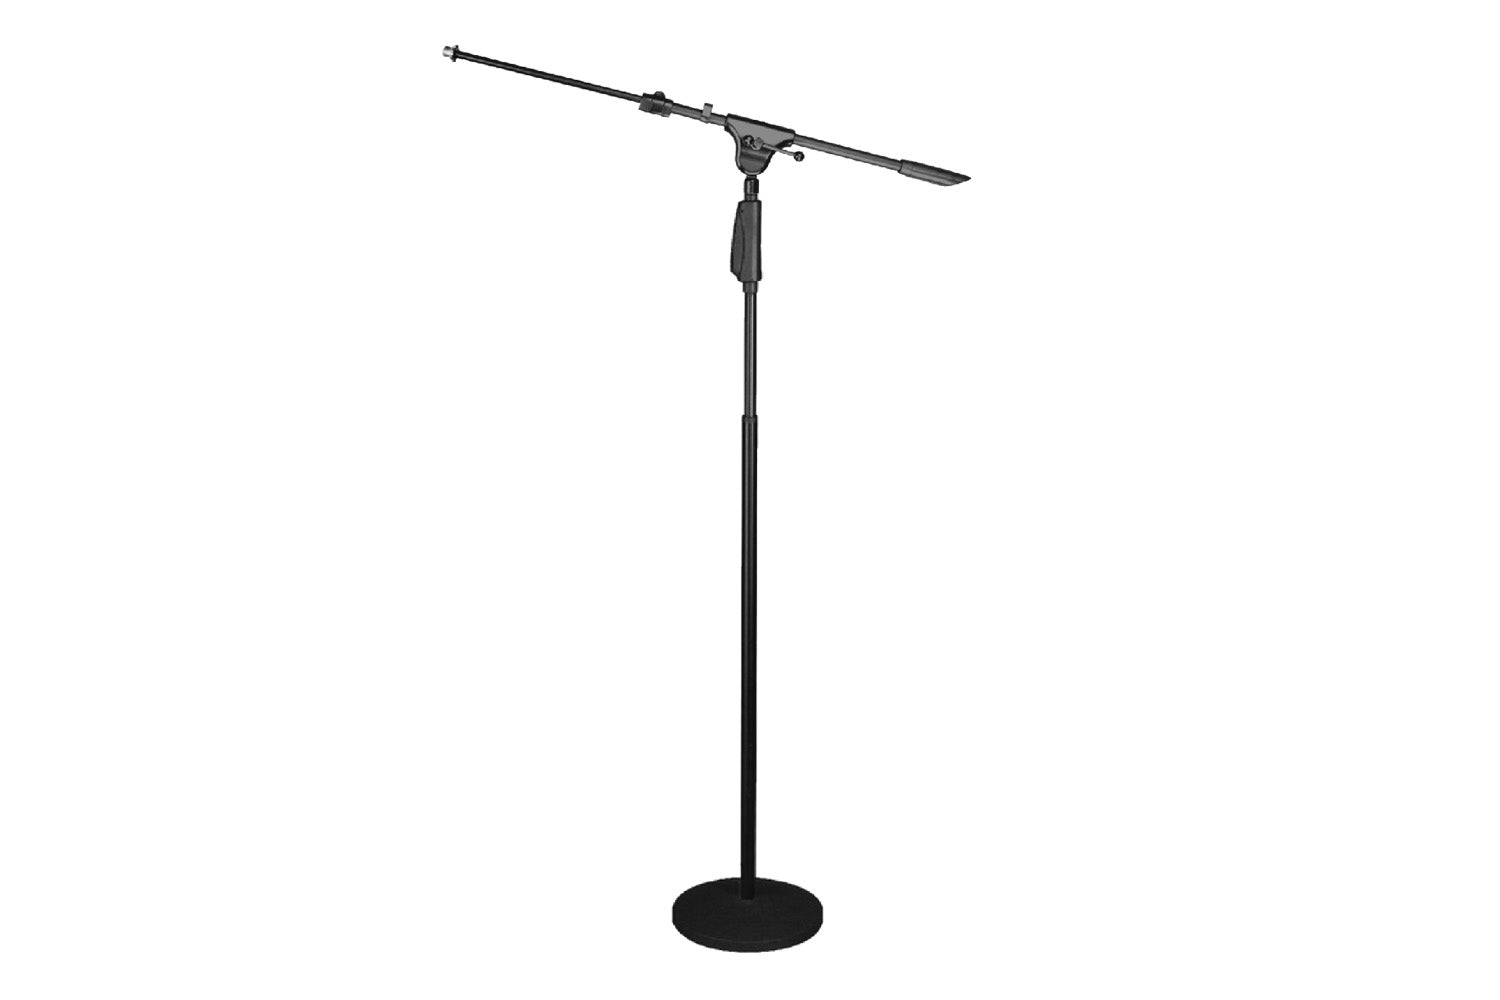 DD129B - Round Base Microphone Stand with telescopic boom